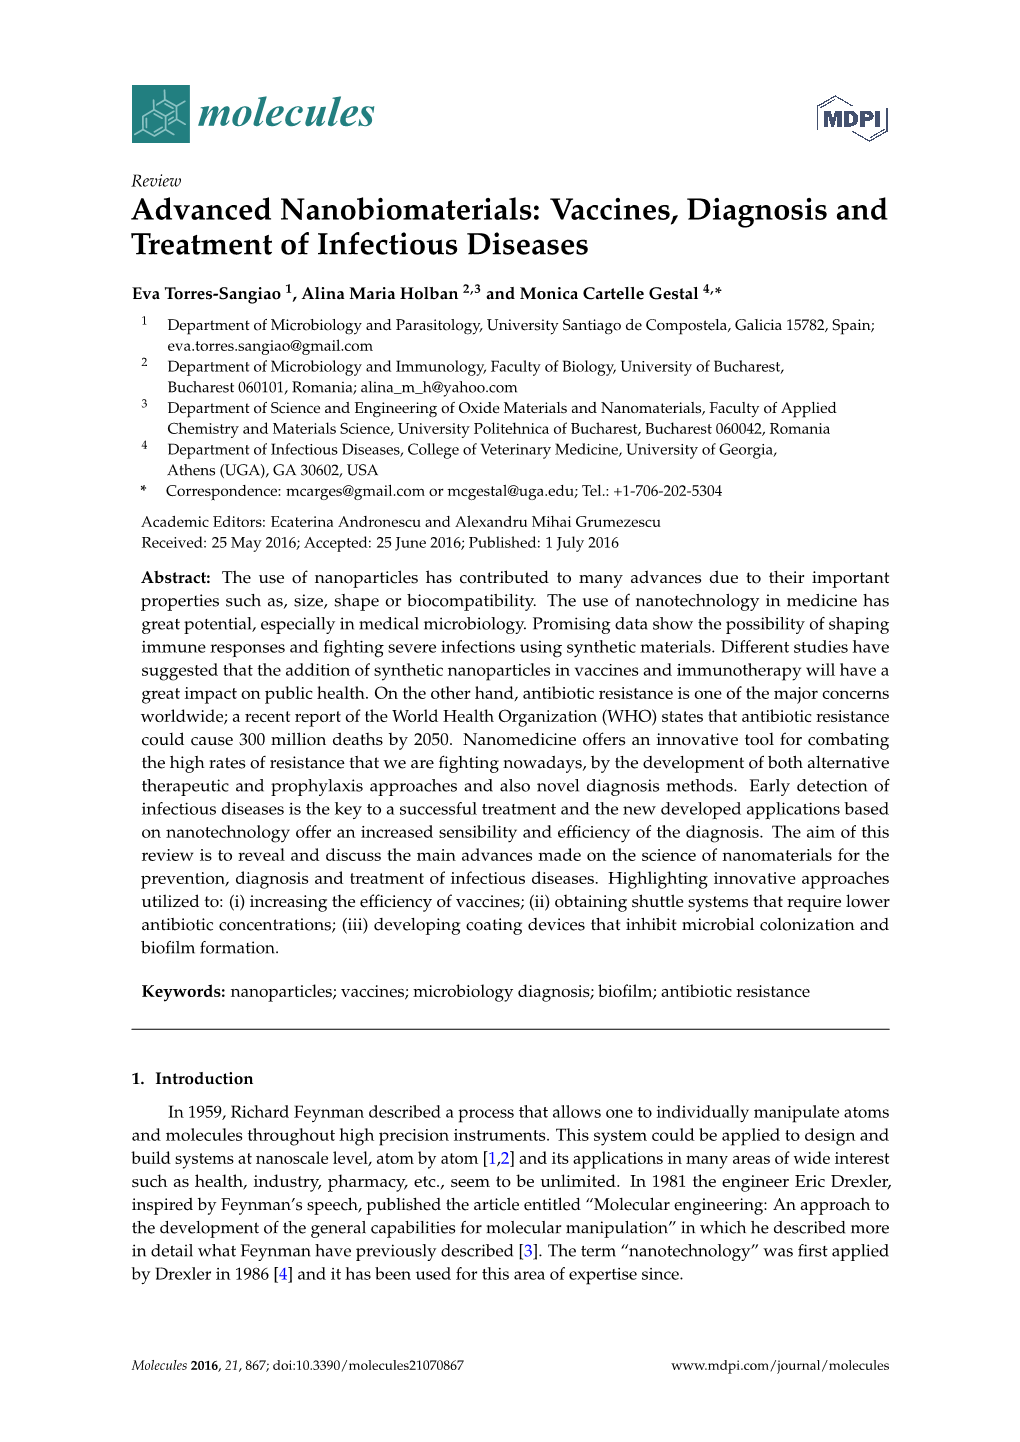 Advanced Nanobiomaterials: Vaccines, Diagnosis and Treatment of Infectious Diseases